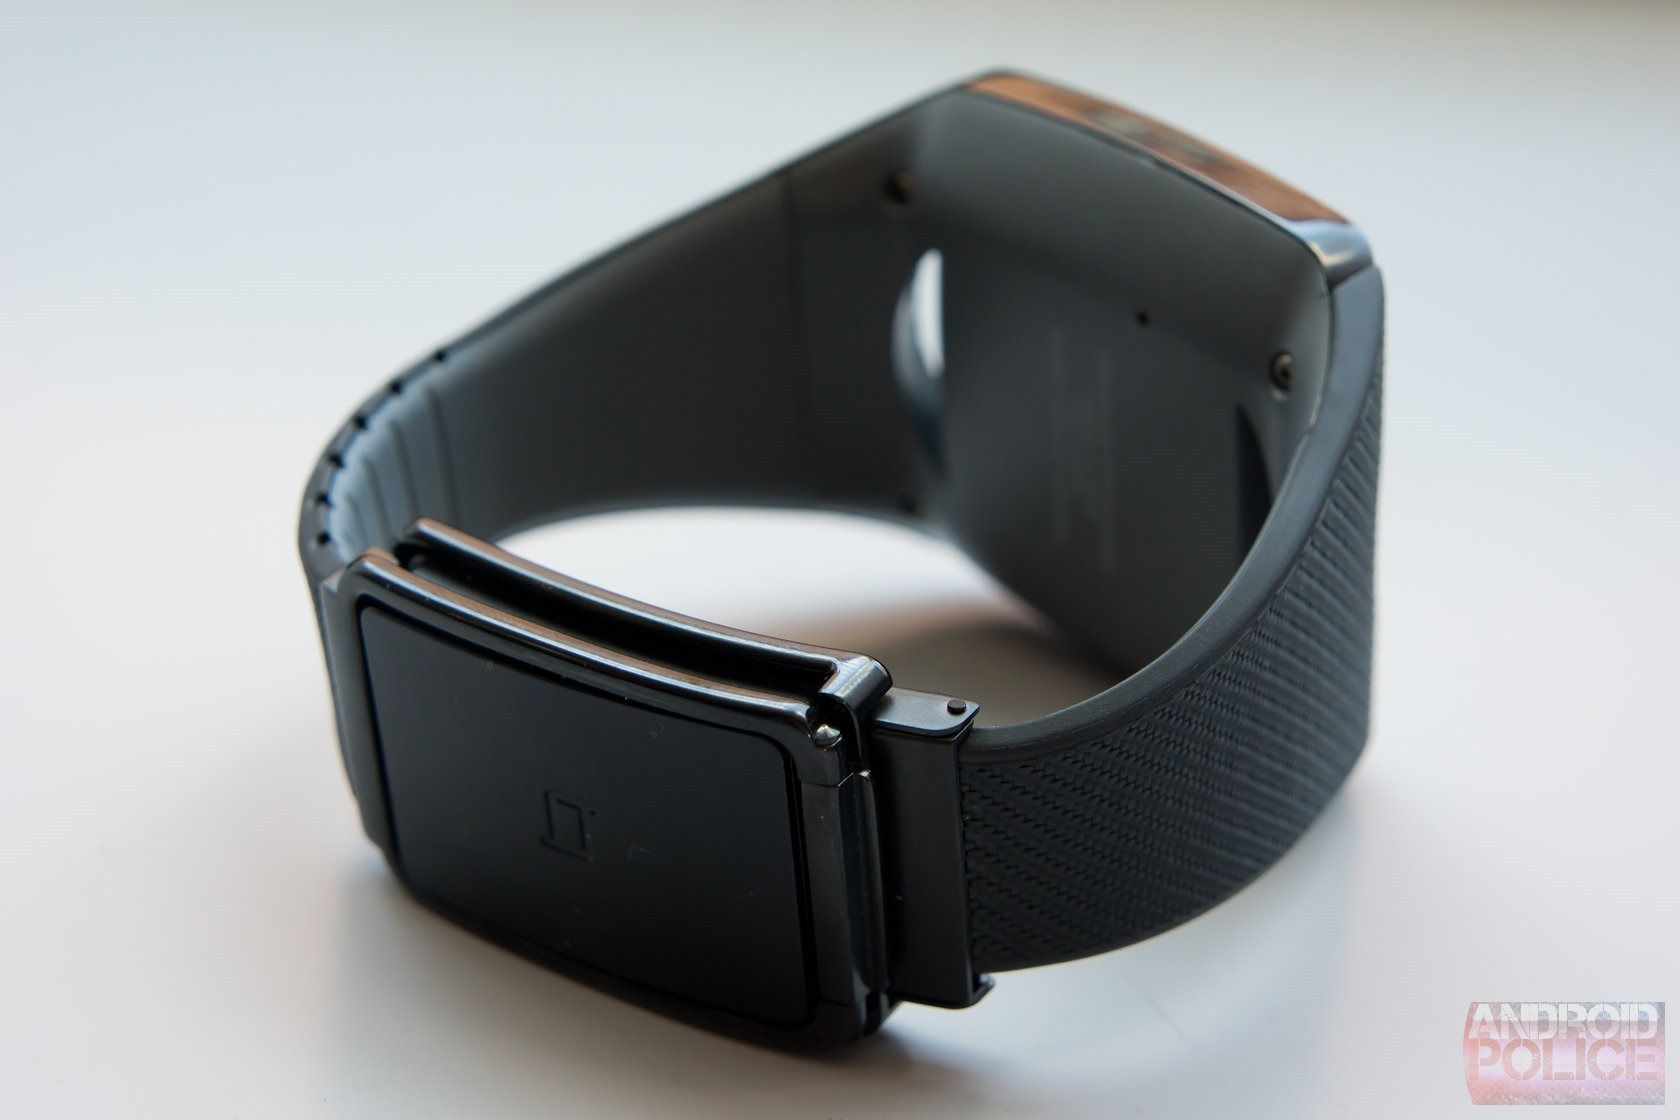 [IFA 2013] Hands-On With The Qualcomm Toq Smartwatch (Video)